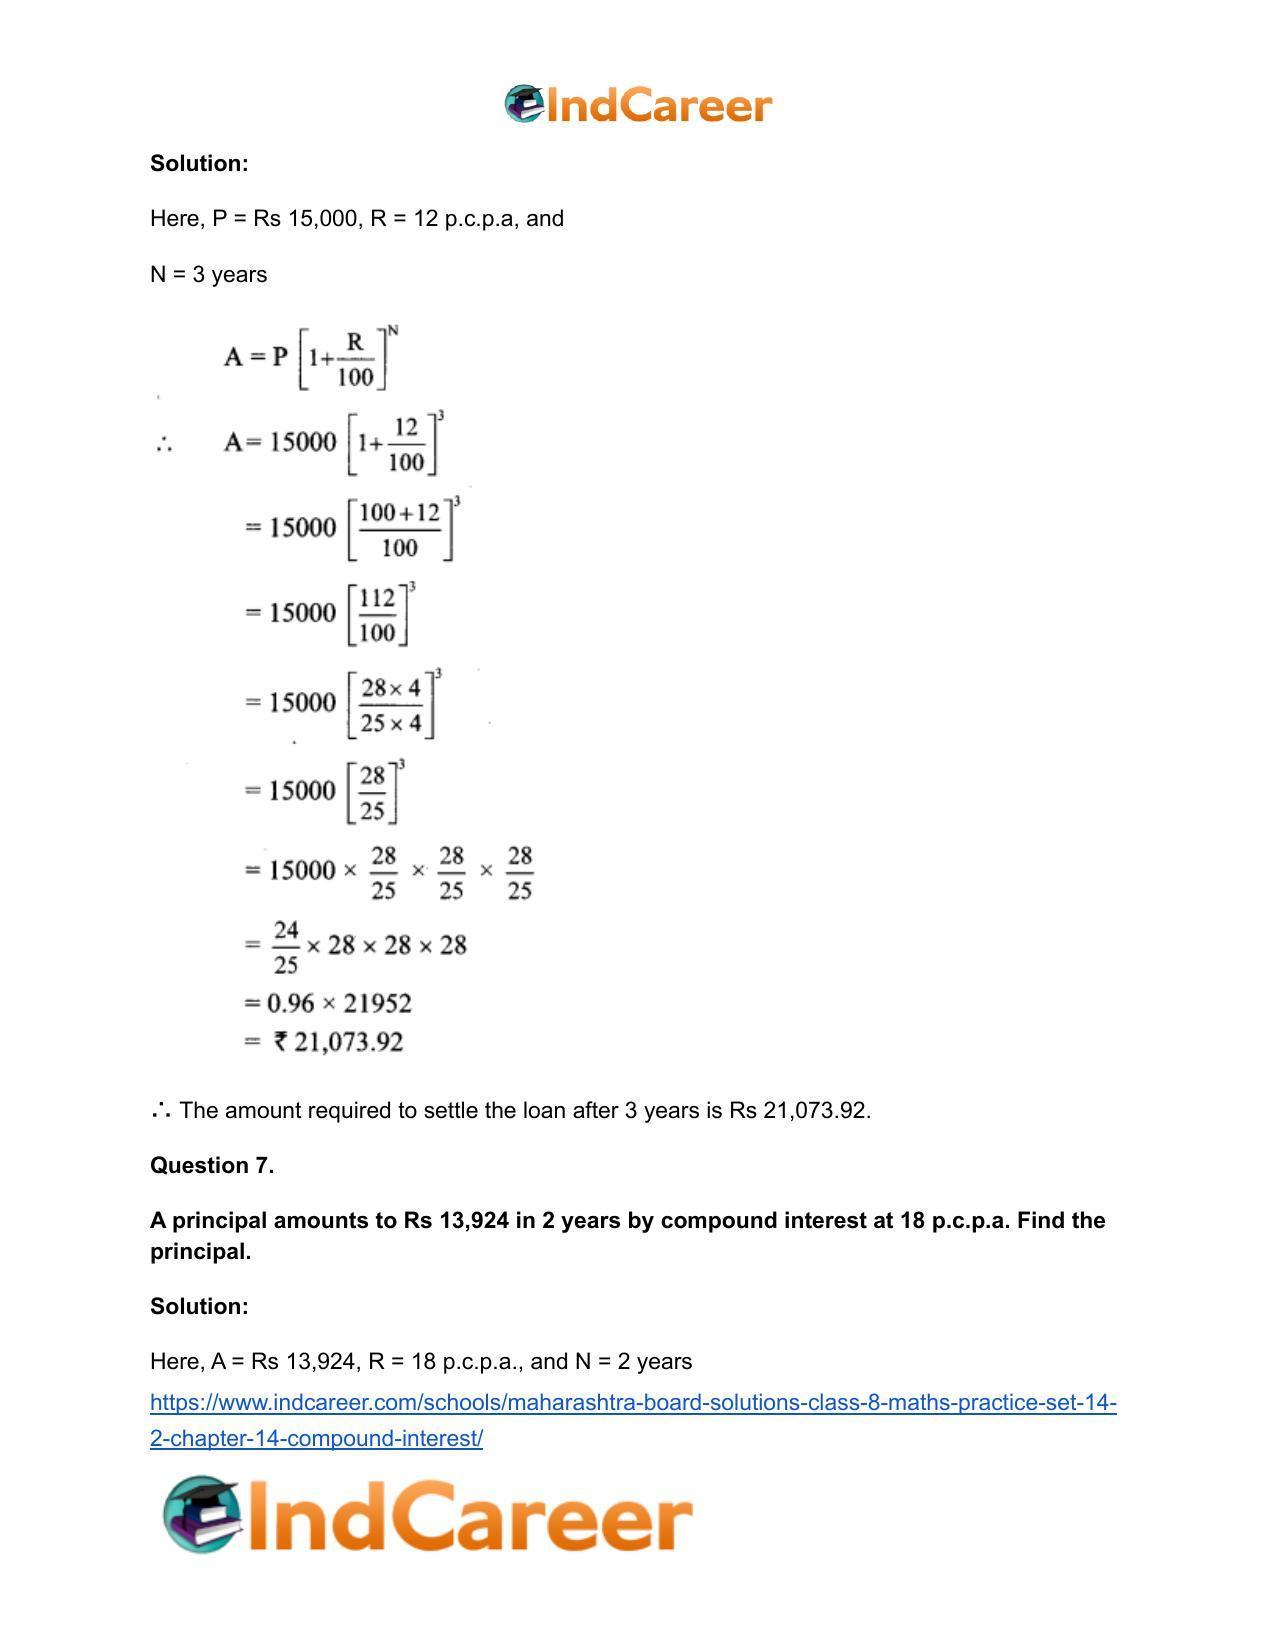 Maharashtra Board Solutions Class 8-Maths (Practice Set 14.2): Chapter 14- Compound Interest - Page 8